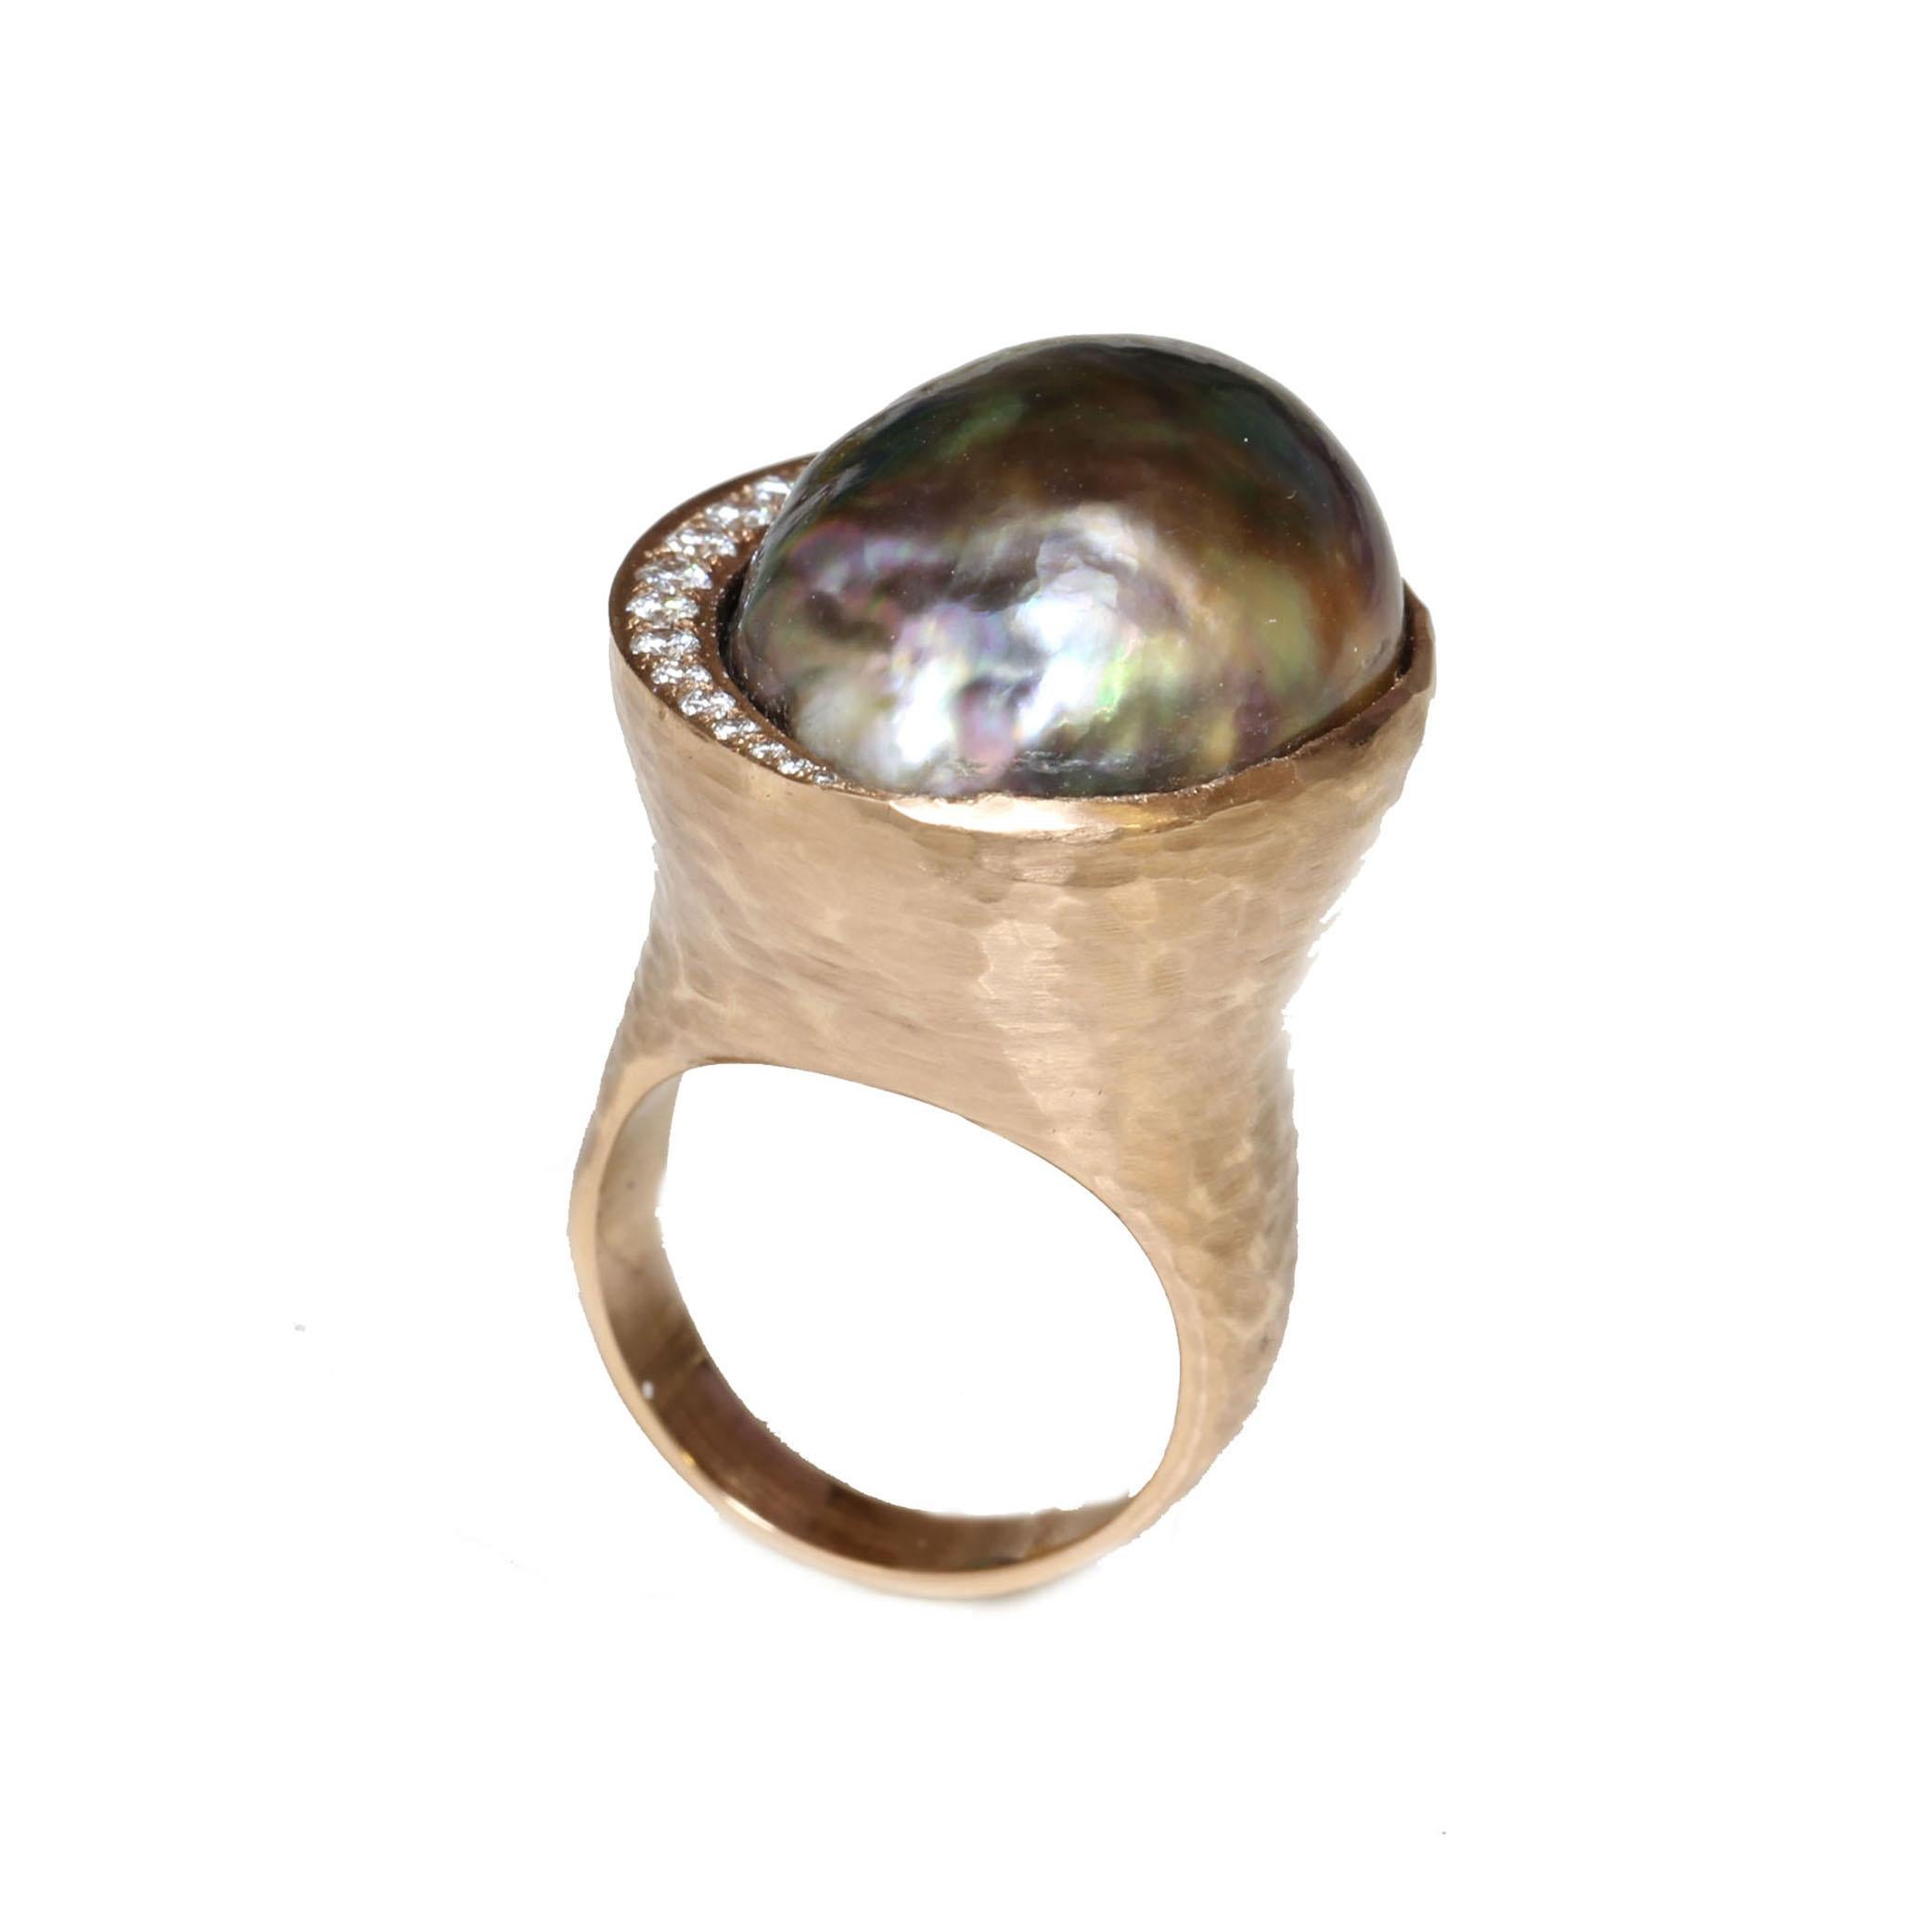 Origin: 	French Polynesia
Pearl Type: 	Tahitian Pearl
Pearl Size: 	Approximately 22.5 x 17mm
Pearl Color: 	Natural Intense Peacock
Pearl Shape: 	Baroque
Pearl Surface: AAA
Pearl Luster: 	AAA Gem
Pearl Nacre: 	Top
Diamond: 	0.25ct
Ring Size: 	6
Gold: